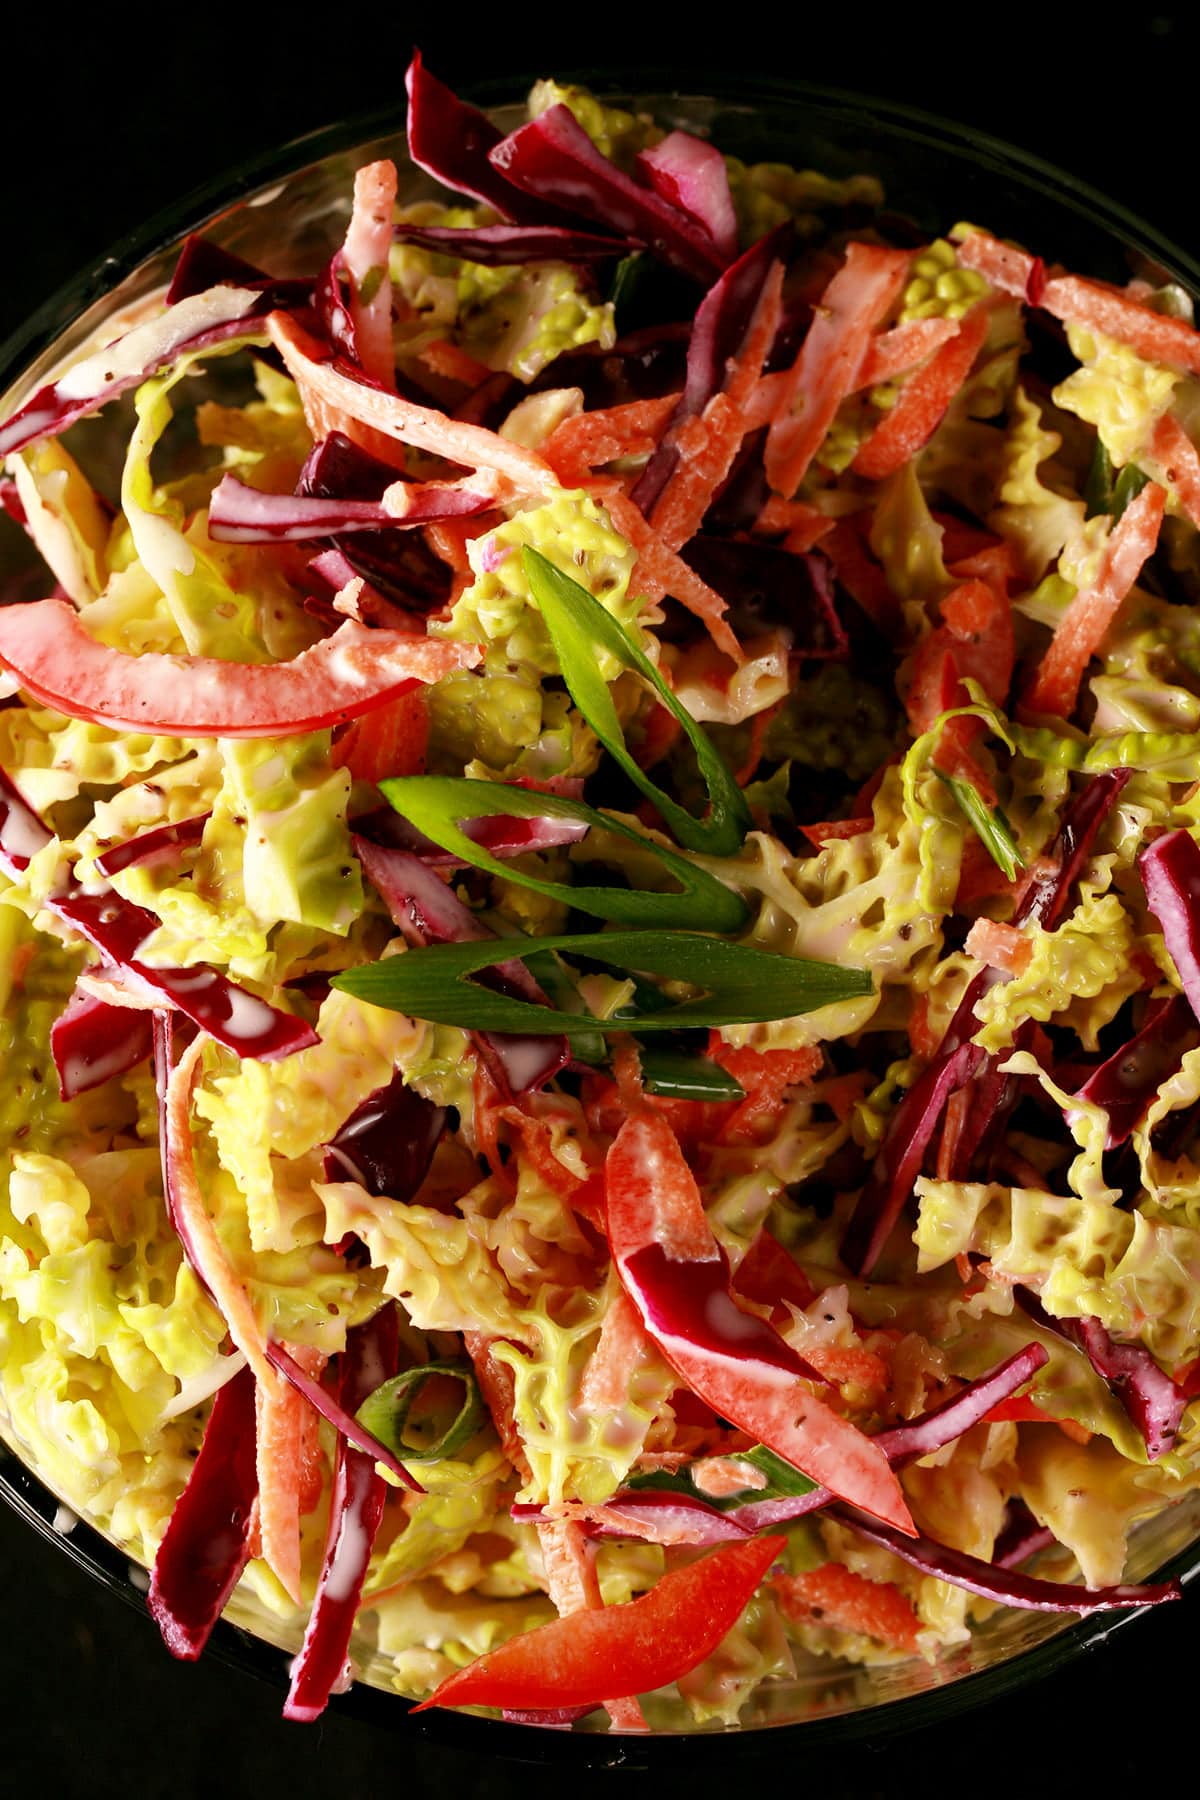 A glass bowl is filled with a colourful coleslaw - the Best Coleslaw Recipe EVER! Red pepper, purple and green cabbage, carrot, and green onions are all visible.